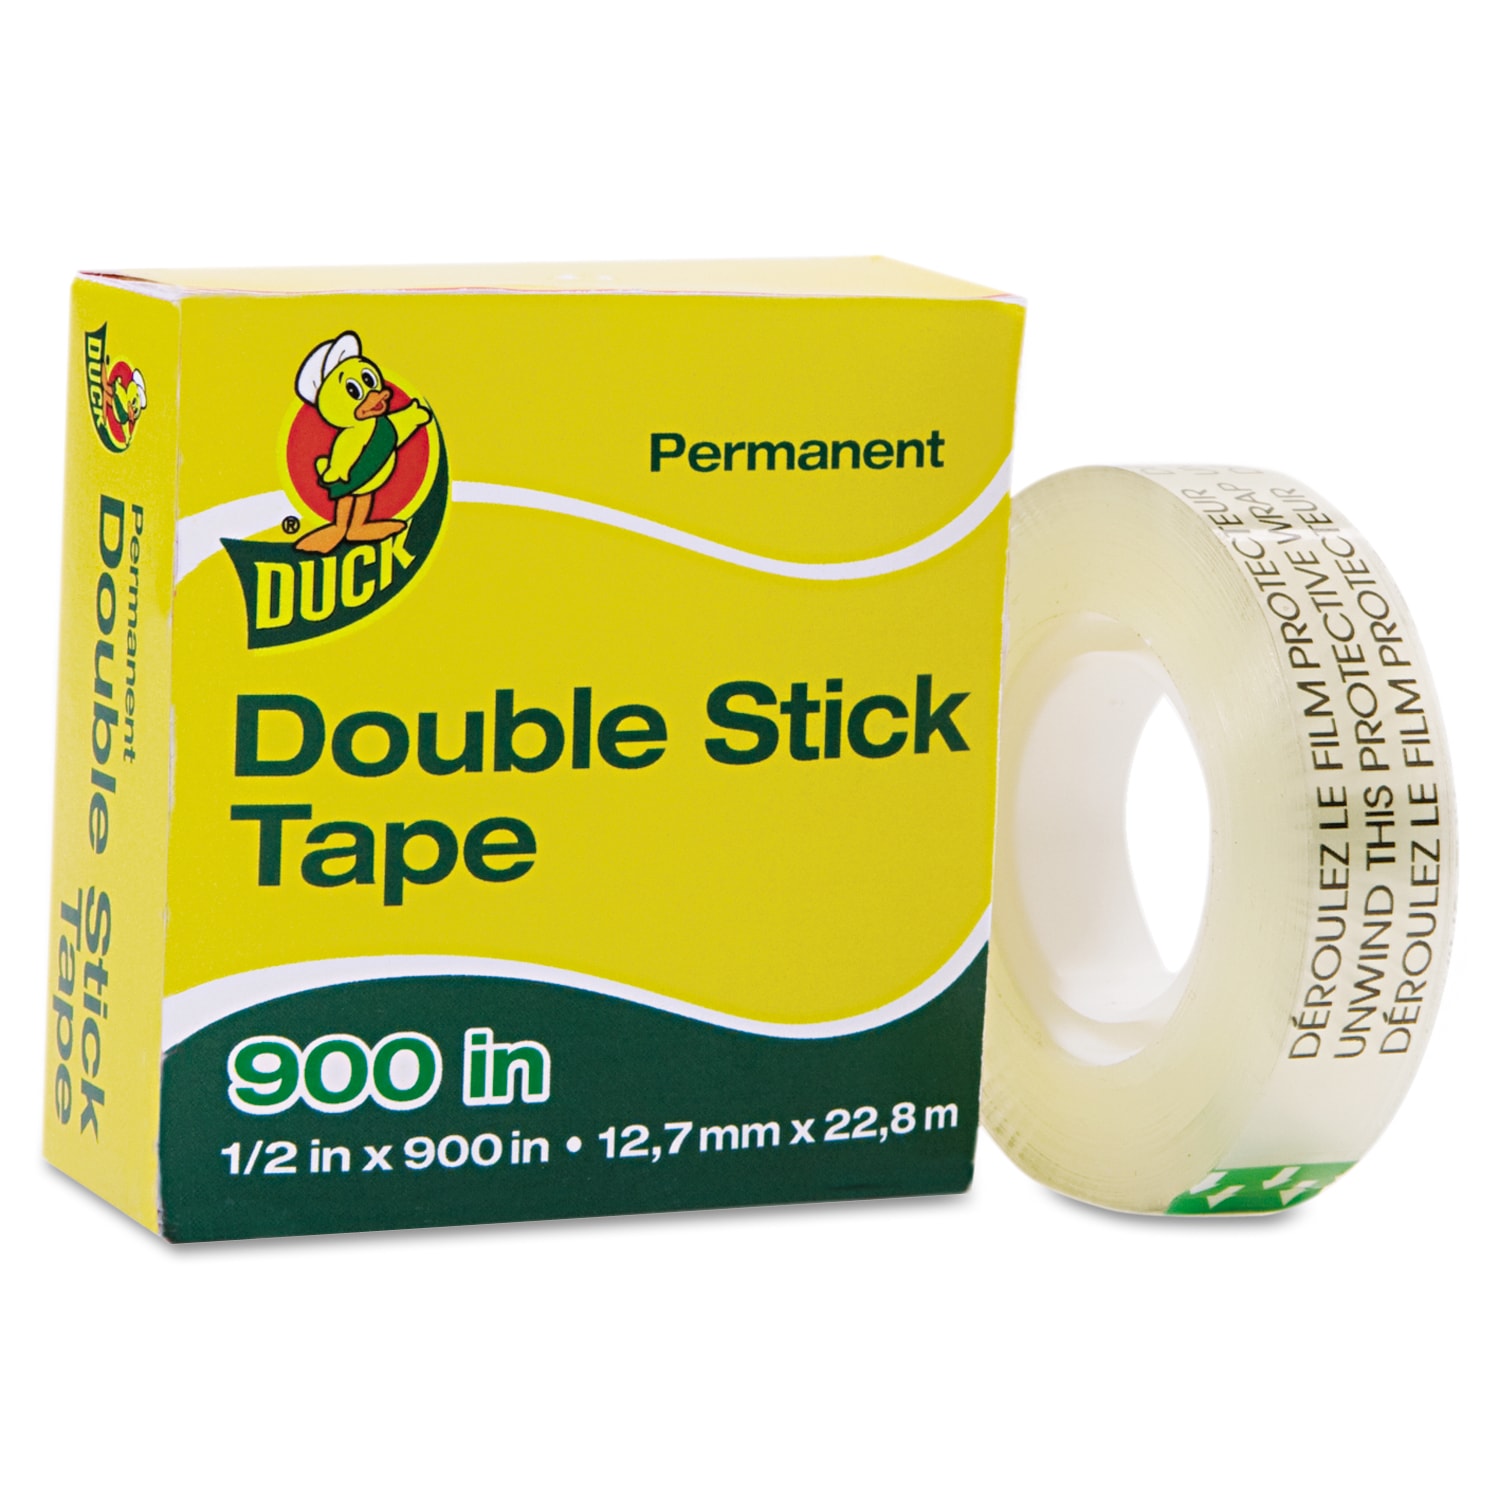 Duck Brand Double-Sided Duct Tape [Removable]: 1.41 in. x 24 ft. (Natural)